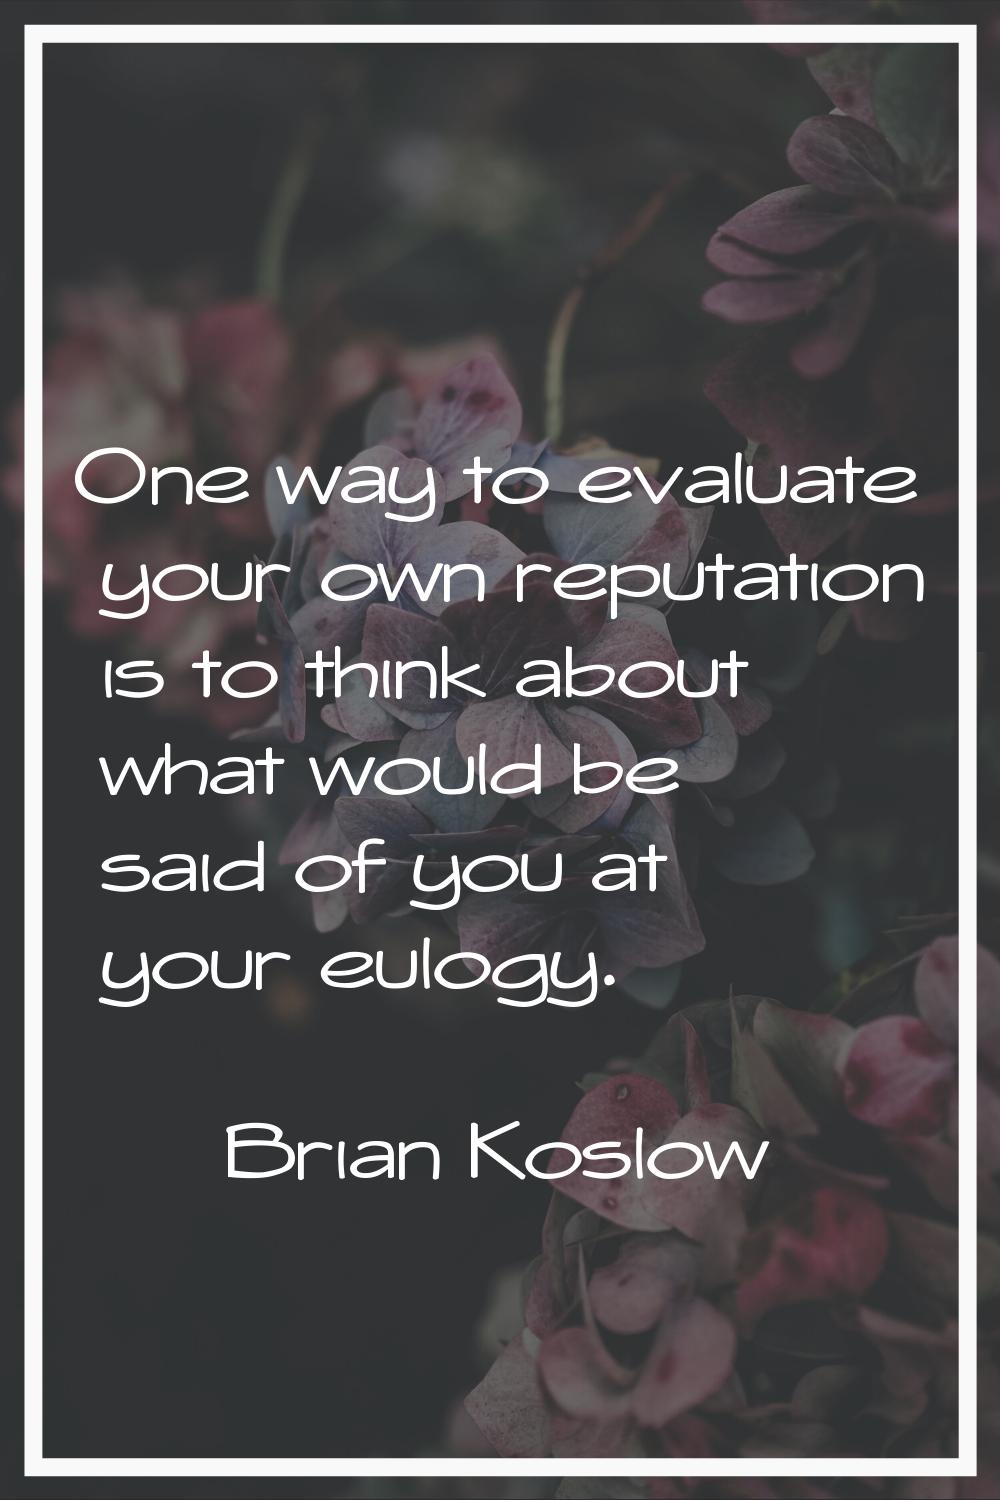 One way to evaluate your own reputation is to think about what would be said of you at your eulogy.